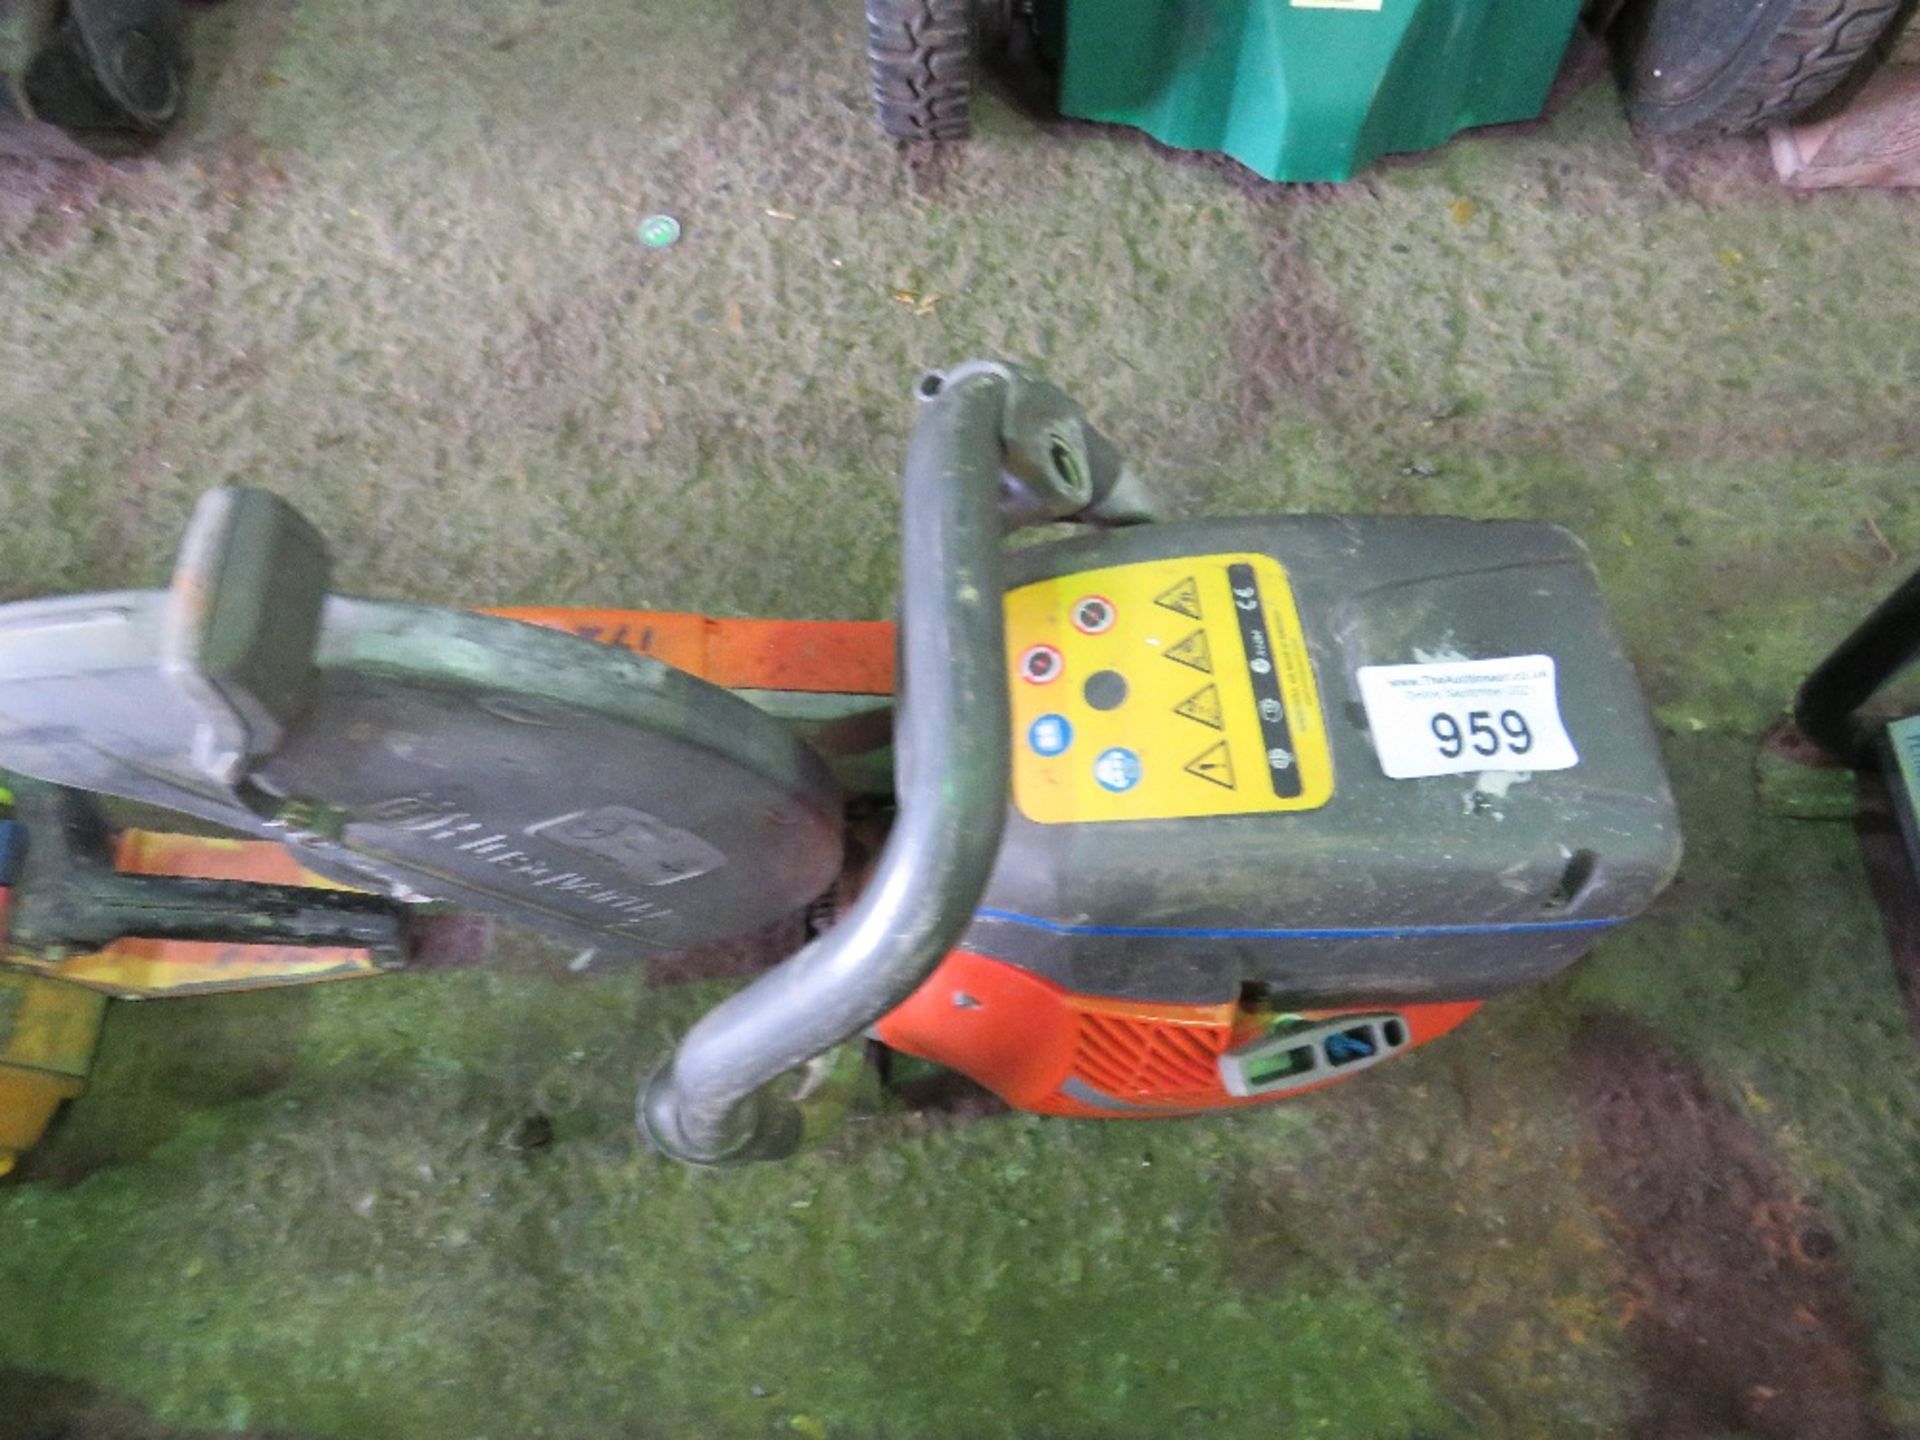 HUSQVARNA K760 PETROL CUT OFF SAW, APPEARS TO BE LATER TYPE MACHINE.